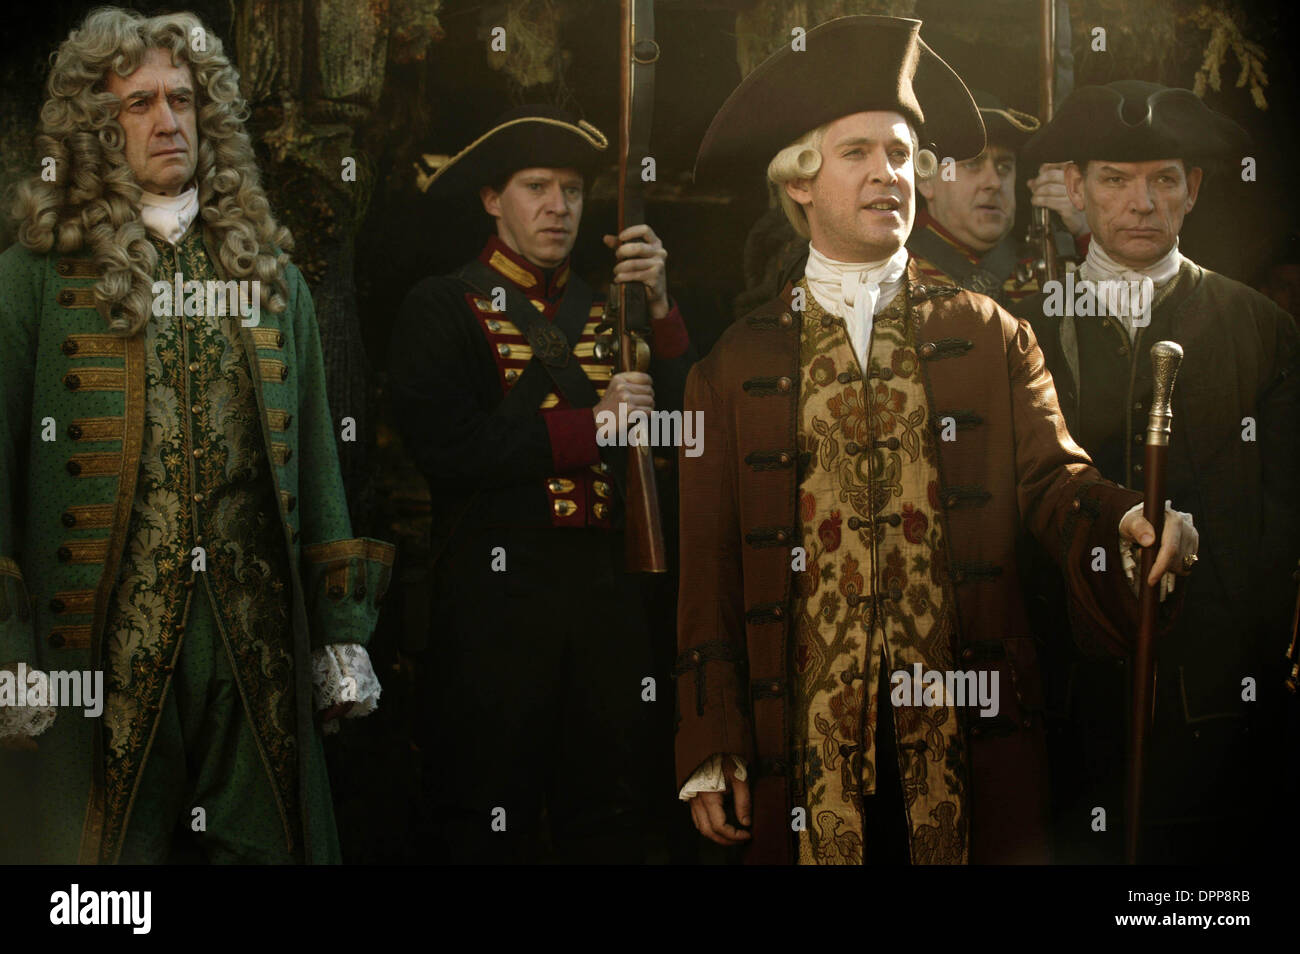 May 19, 2006 - (L-R) JONATHAN PRYCE, GILES NEW, TOM HOLLANDER, ANGUS BARNETT (OBSCURED), DAVID SCHOFIELD.PIRATES 3.PIRATES OF THE CARIBBEAN: AT WORLD'S END.SUPPLIED BY ES-   TV-FILM STILL.K53369(Credit Image: © Globe Photos/ZUMAPRESS.com) Stock Photo